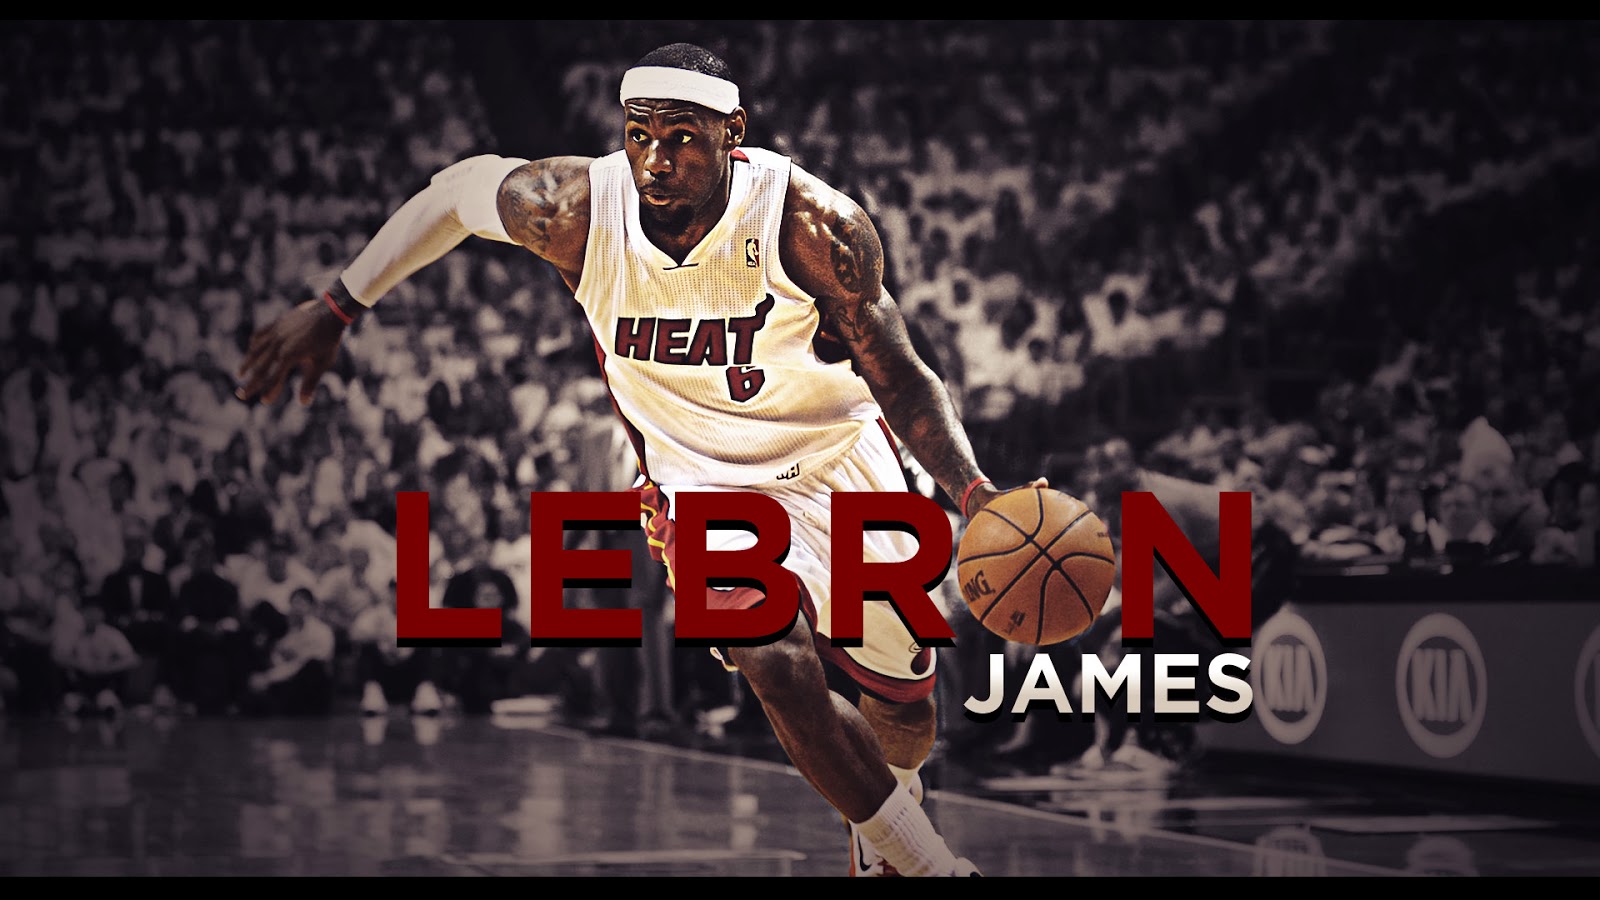 Its All About Basketball Lebron James New Wallpaper